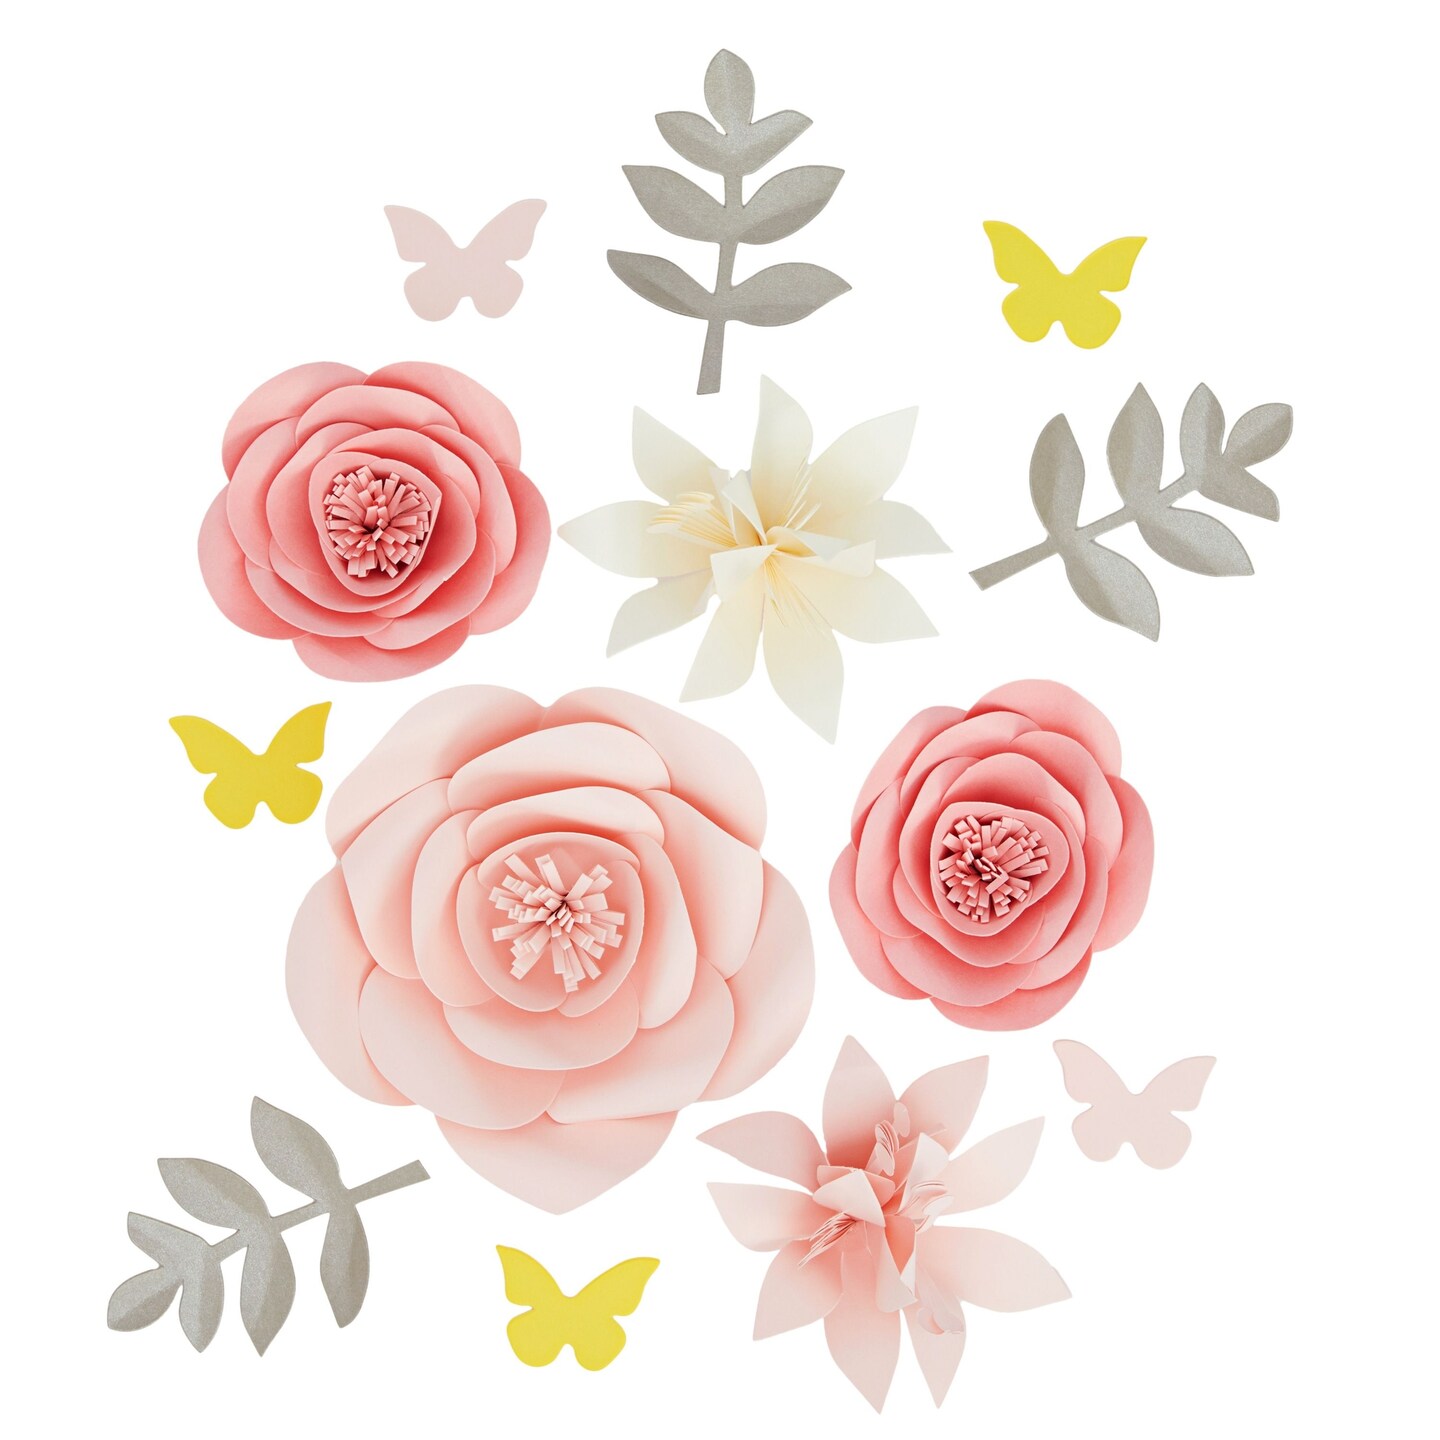 3D Paper Flowers Decorations For Wall Decor, Pink Floral